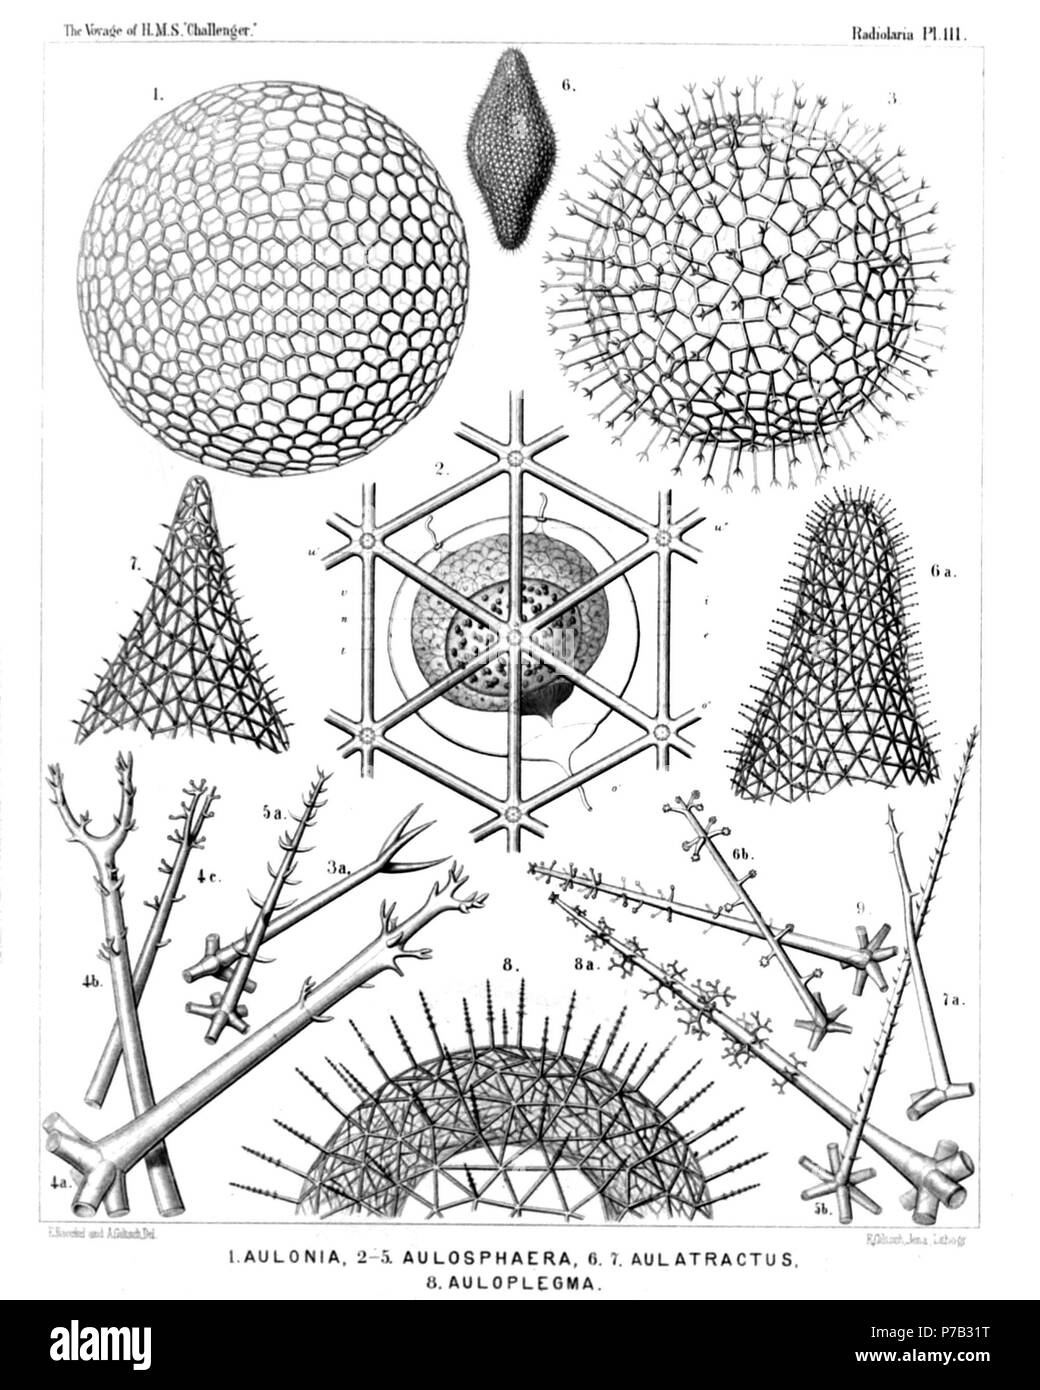 English: Illustration from Report on the Radiolaria collected by H.M.S. Challenger during the years 1873-1876. Part III. Original description follows:  Plate 111. Aulosphærida.  Diam.  Fig. 1. Aulonia hexagonia, n. sp., × 30  The complete spherical shell.  Fig. 2. Aularia ternaria, n. sp., × 300  A group of six triangular meshes, with seven nodal points of radial tubes. Behind the central capsule, with its double membrane (e, outer; i, inner) and radiate operculum (o); u, the two outer parapylæ; v, vacuoles in the protoplasm. The ellipsoidal nucleus (n) contains numerous nucleoli (l).  Fig. 3. Stock Photo